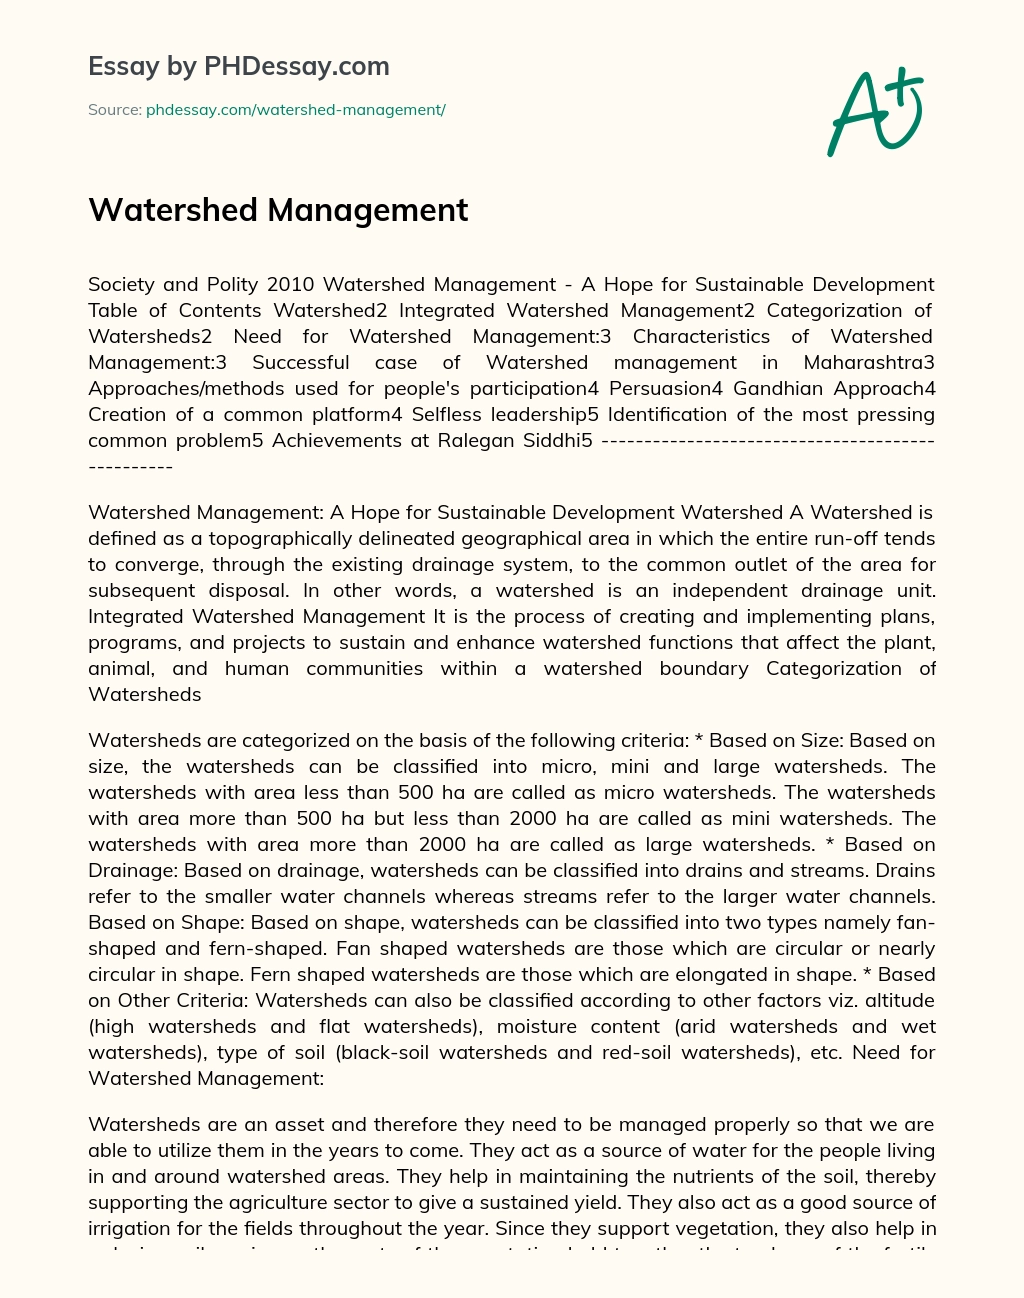 Watershed Management essay